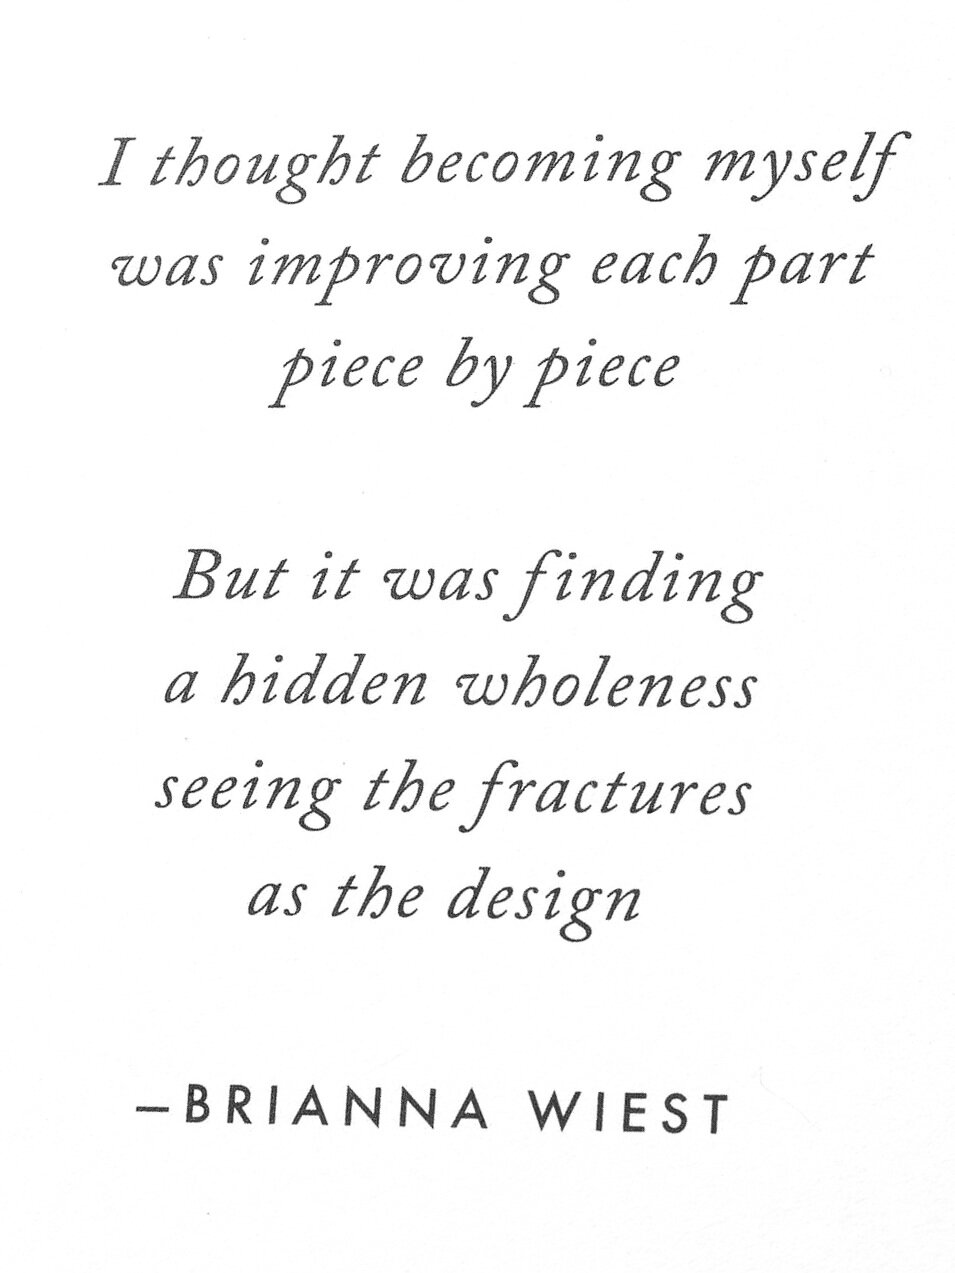  A quote from Brianna Wiest reads: “I thought becoming myself was improving each part piece by piece. But it was finding a hidden wholeness seeing the fractures as the design.” These fractures could represent past trauma. We offer trauma therapy in D